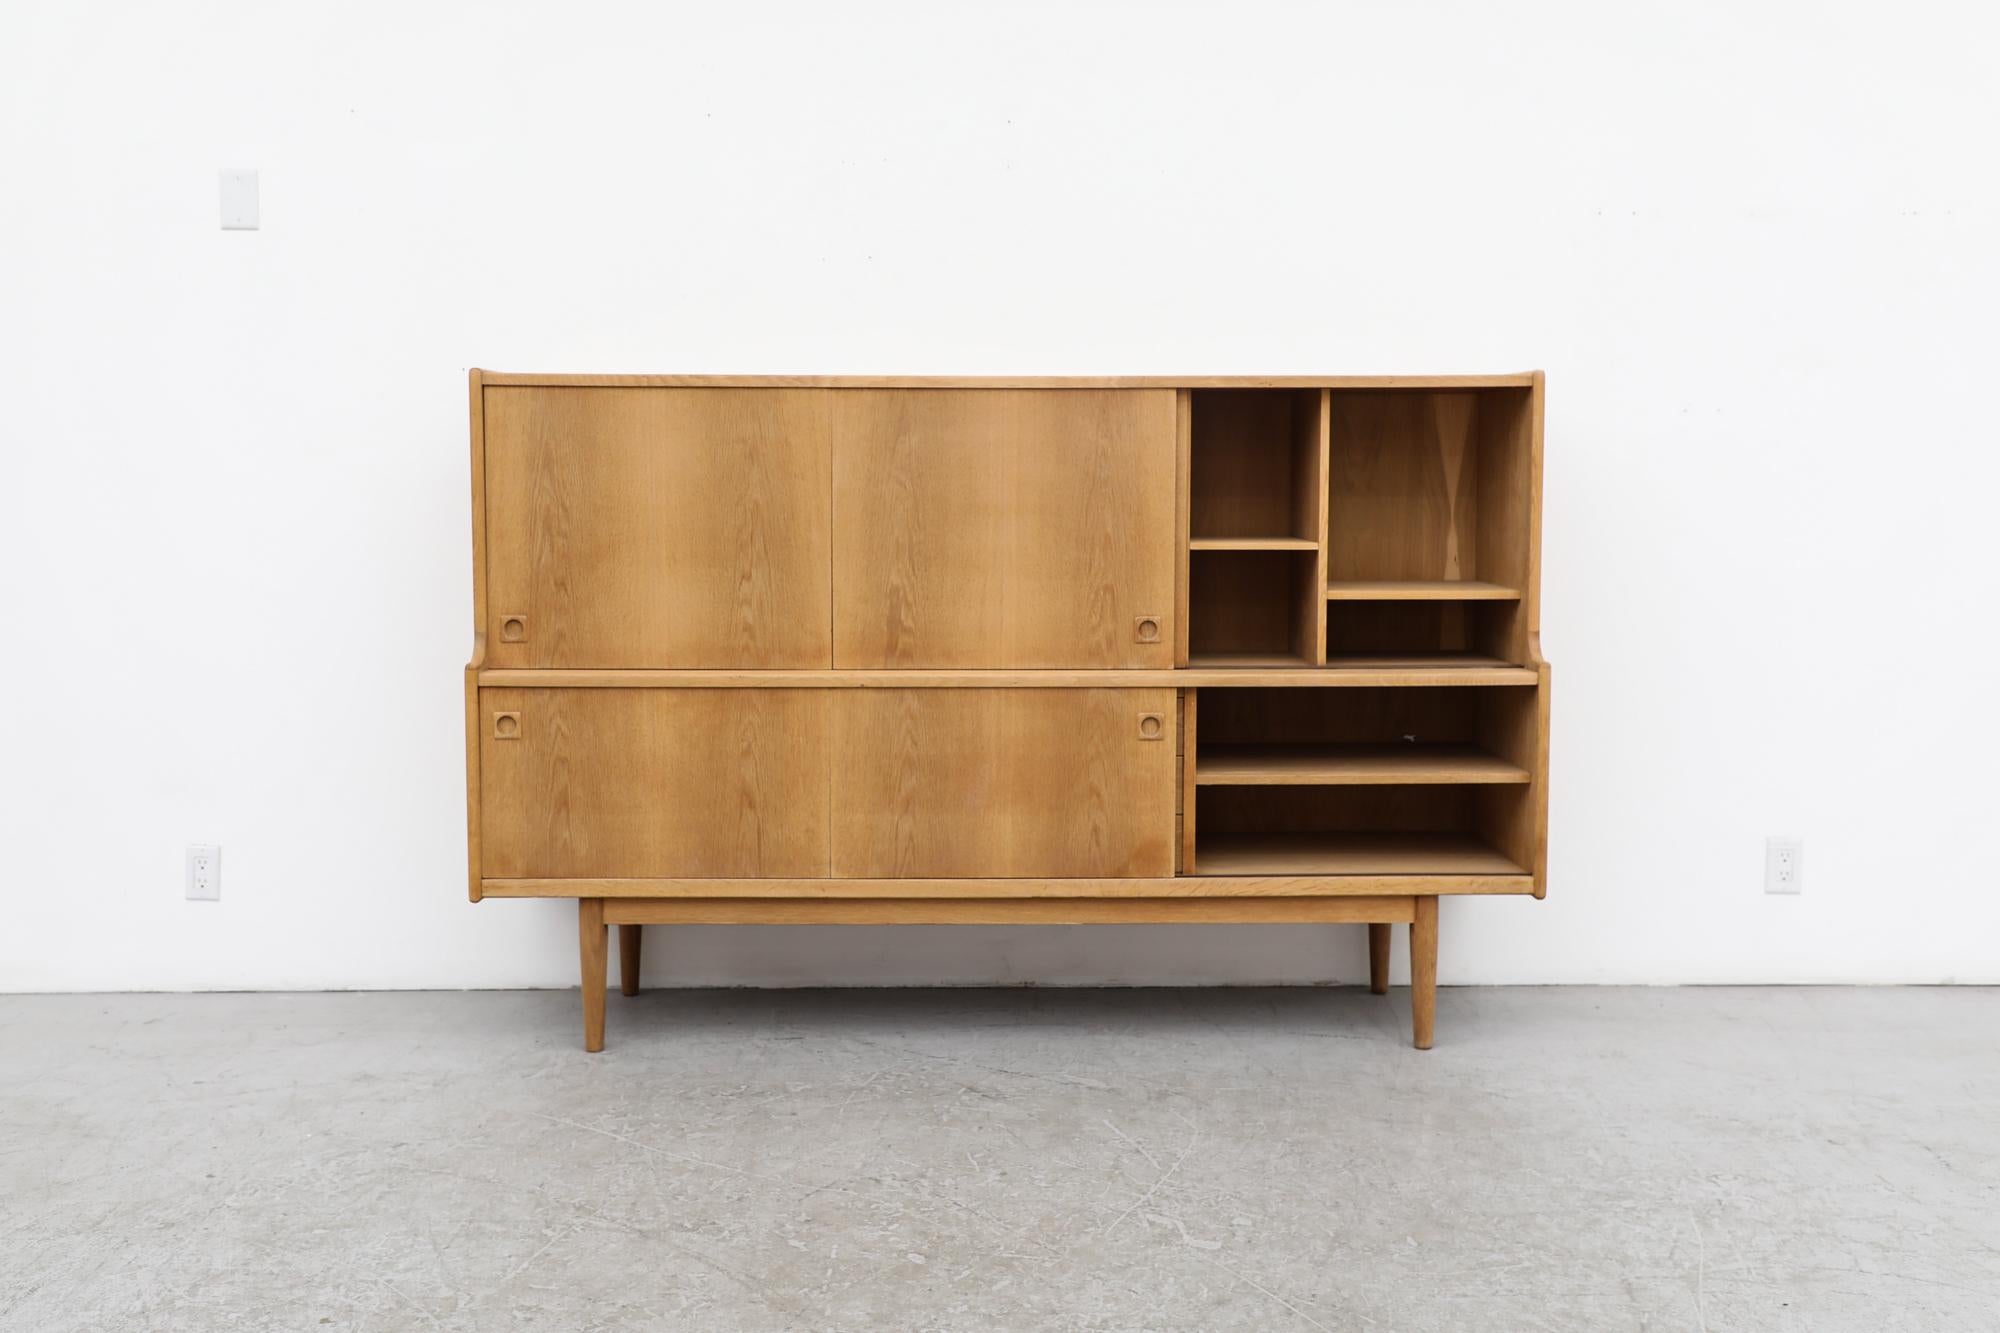 Mid-Century Danish raw oak Highboard by Johannes Andersen, whose while working with oak, teak, mahogany, and rosewood he elevated Scandinavian modernism's emphasis on efficiency and space conservation to new heights.
This piece has been sanded and